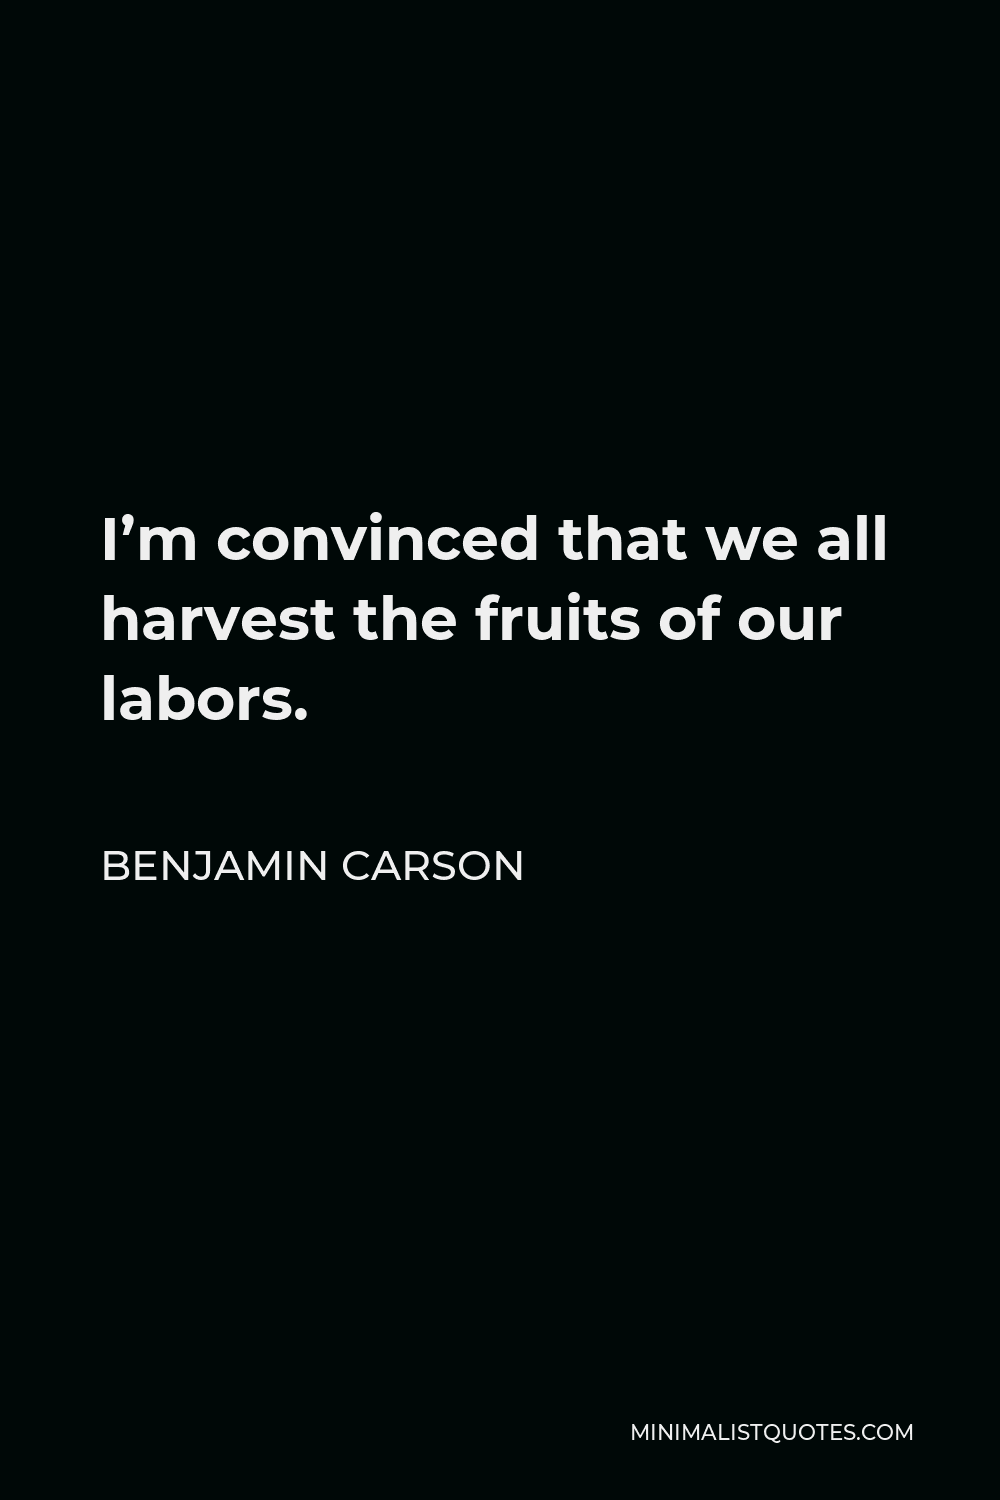 Benjamin Carson Quote - I’m convinced that we all harvest the fruits of our labors.